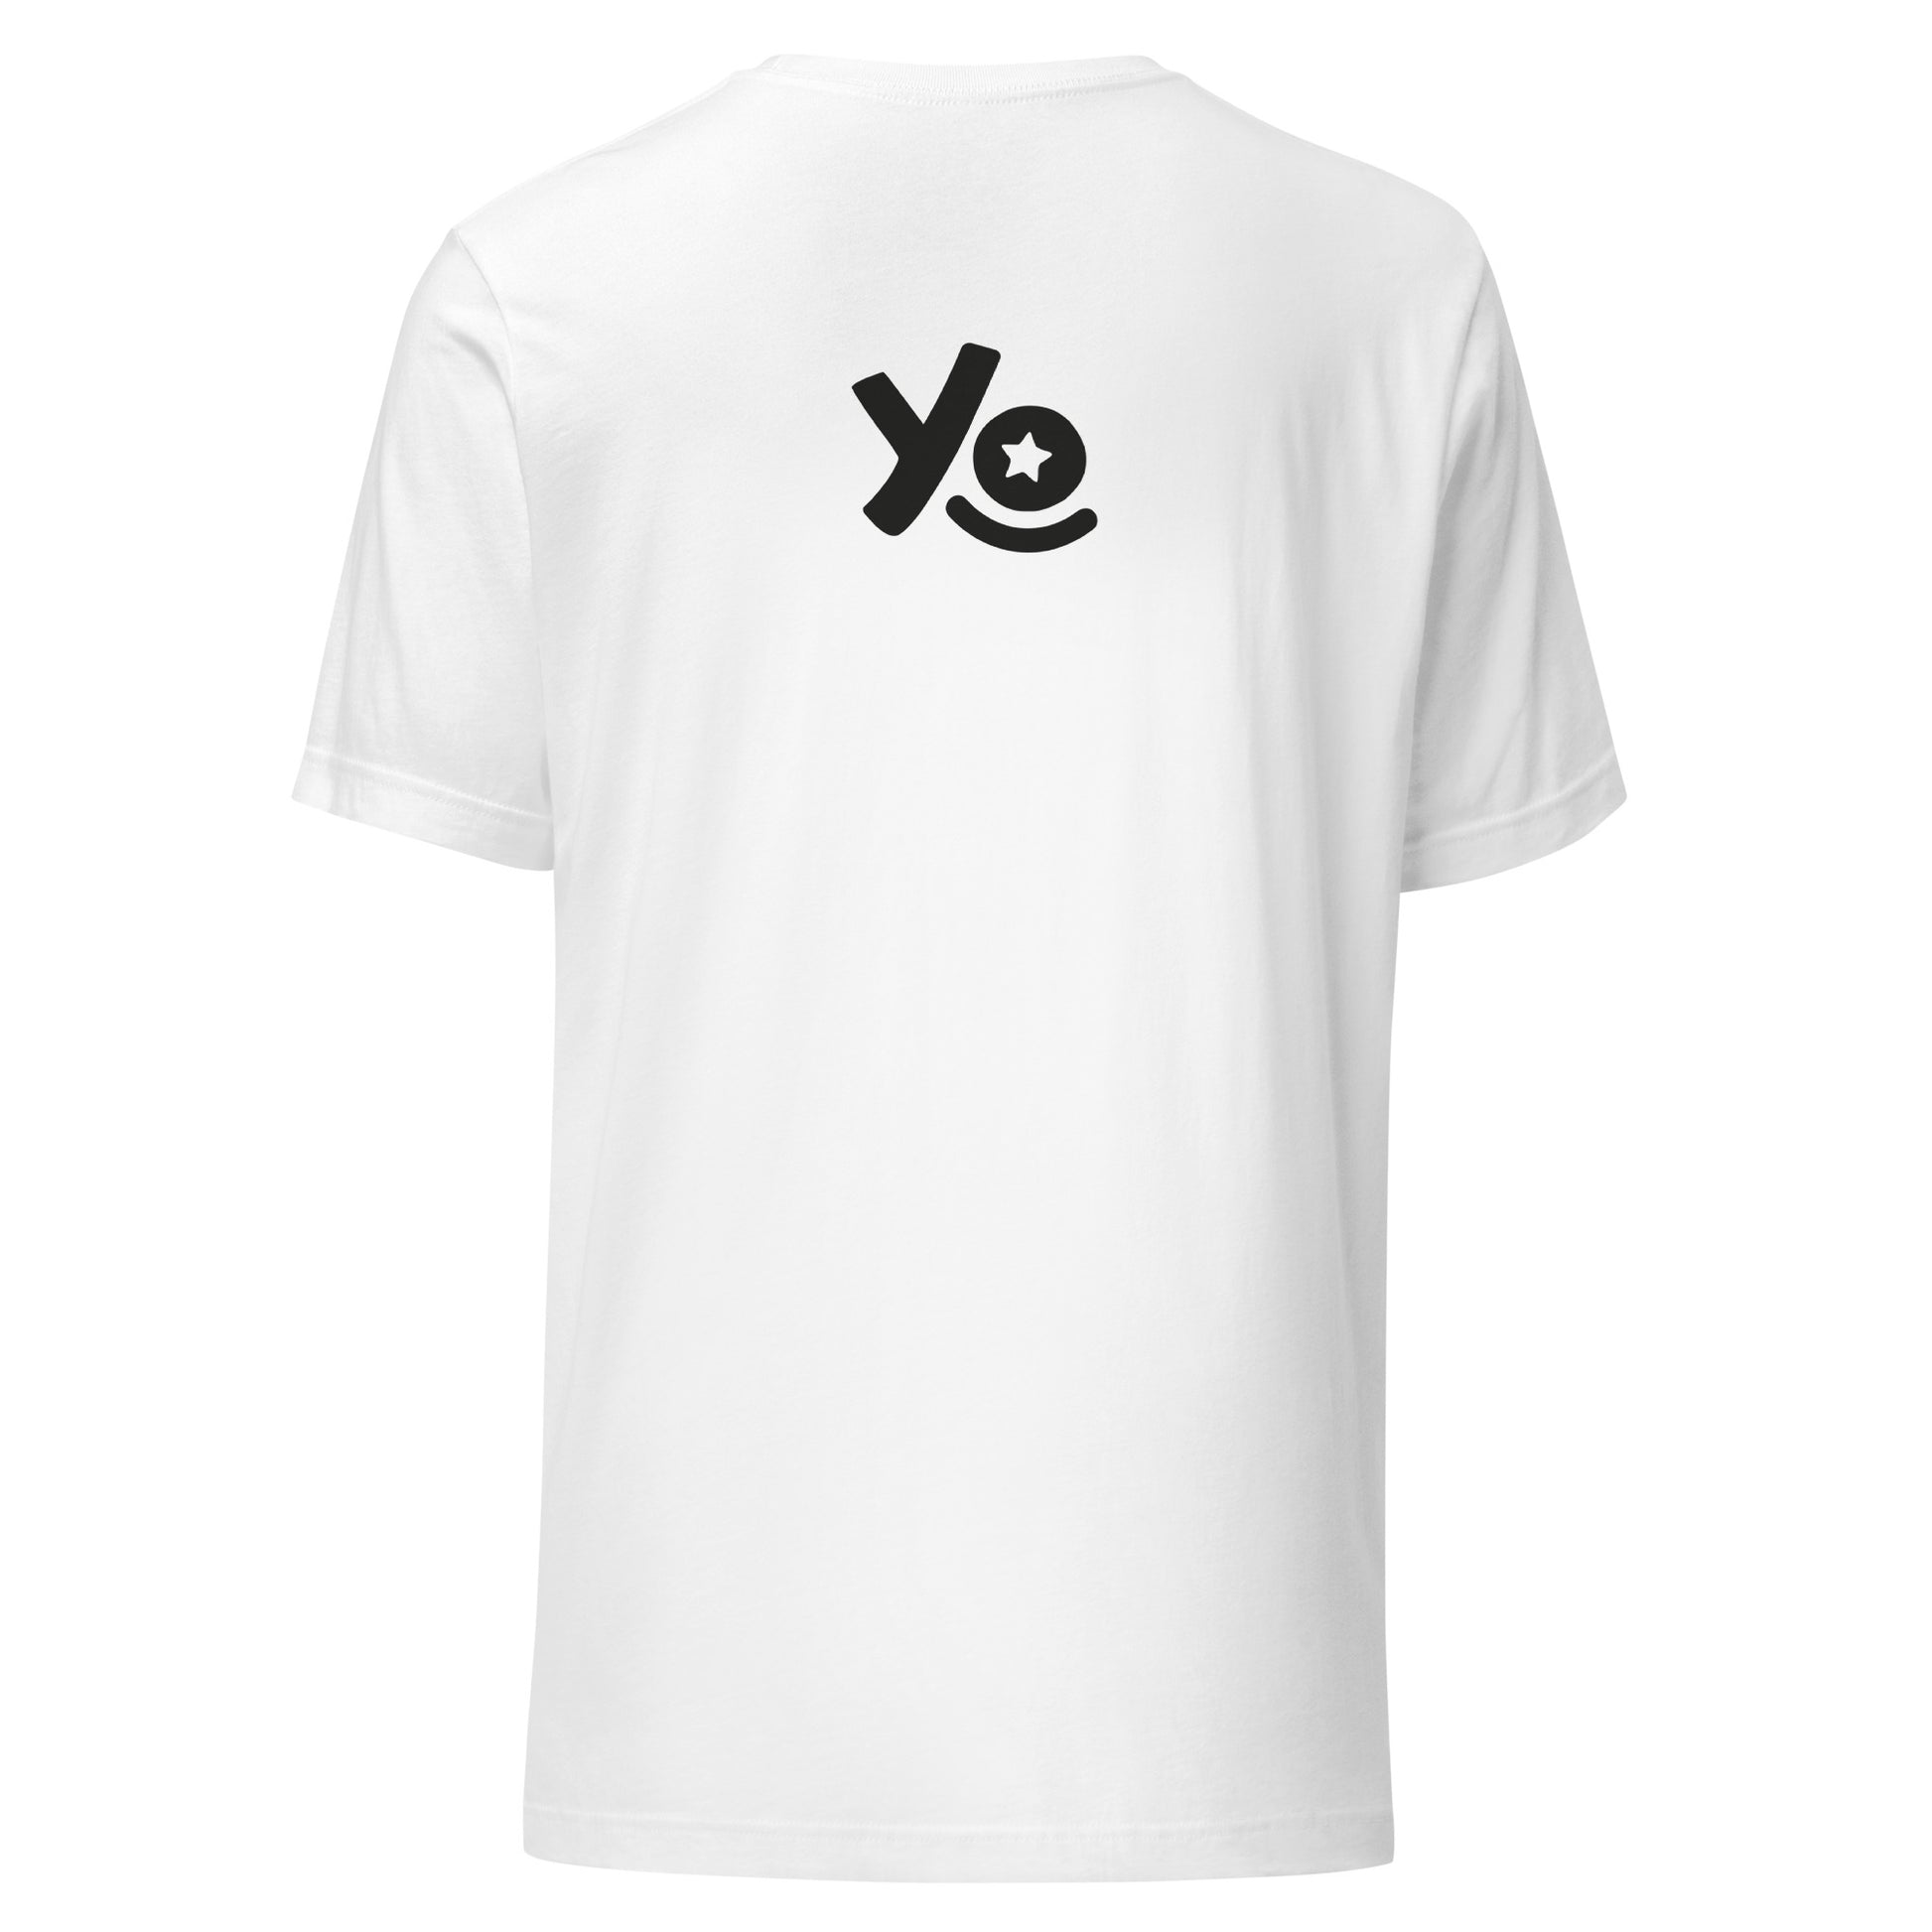 tshirt white young inventors from the back